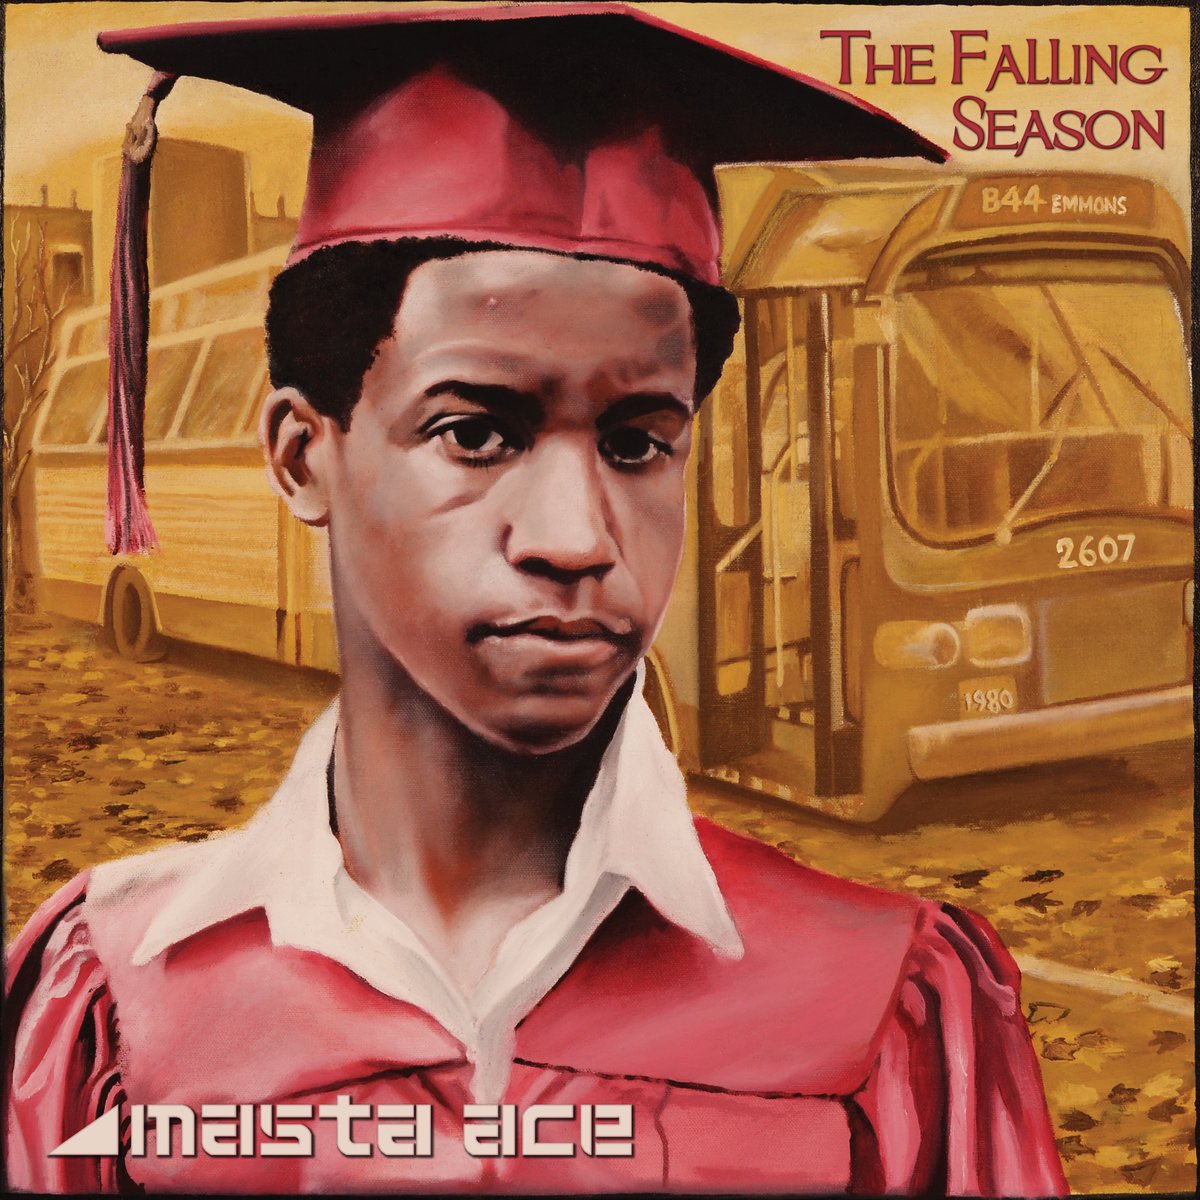 The Falling Season (2016)Another amazing concept album from Masta Ace. This one takes the listener through his 4 years at high school! “Story of me” is a 7 min masterpiece! One of his best songs. Your old Droog features on this for you backpackers